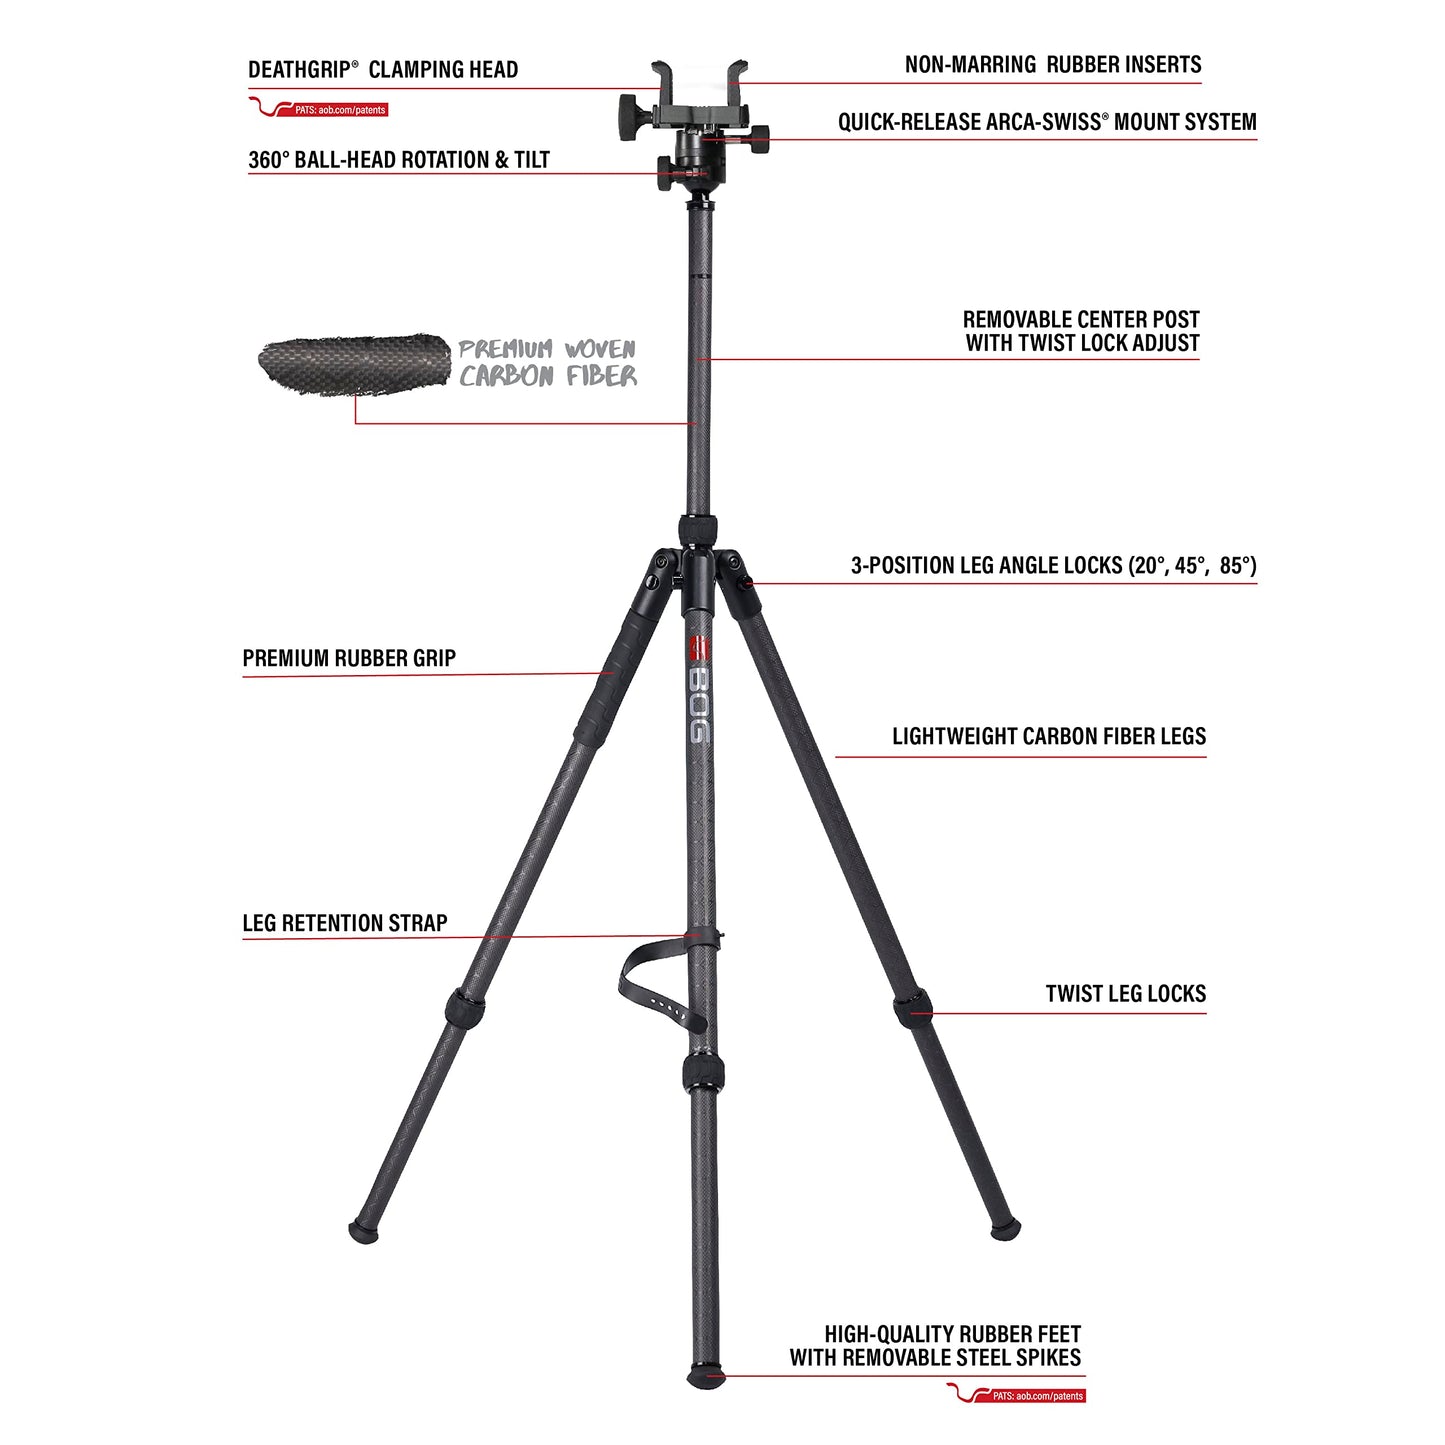 BOG DeathGrip Sherpa Carbon Fiber Tripod with Heavy Duty Construction, 360 Degree Ball Head, Quick-Release Arca-Swiss Mount System, and Optics Plate for Hunting, Shooting, Glassing, and Outdoors,Black